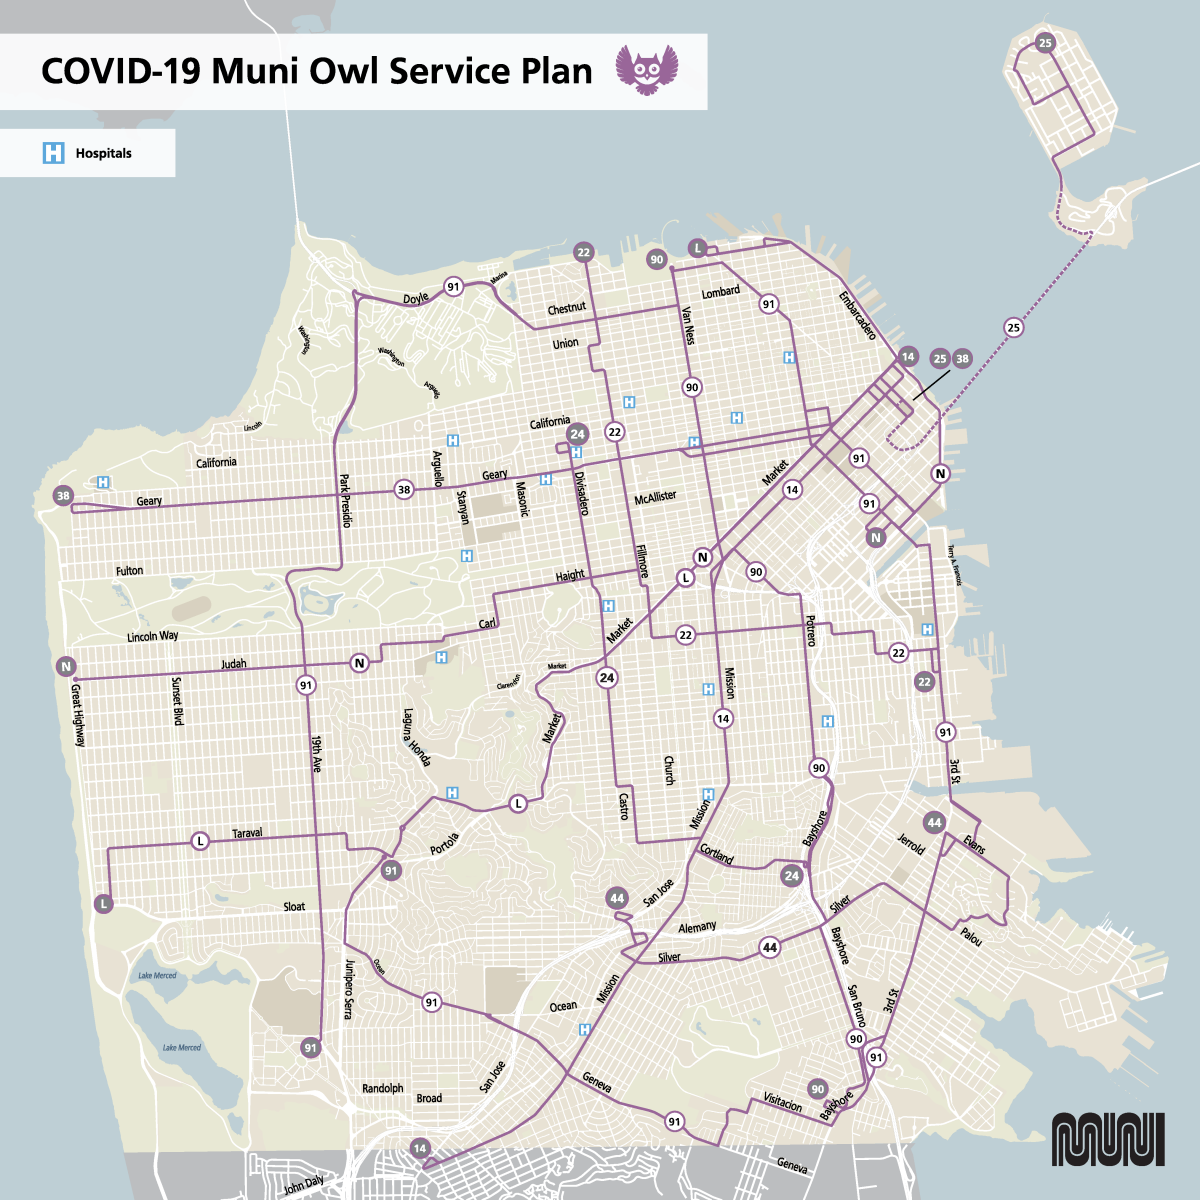 Muni Owl system map effective April 8 2020 in response to COVID-19. These routes operate from 10pm to 5am.